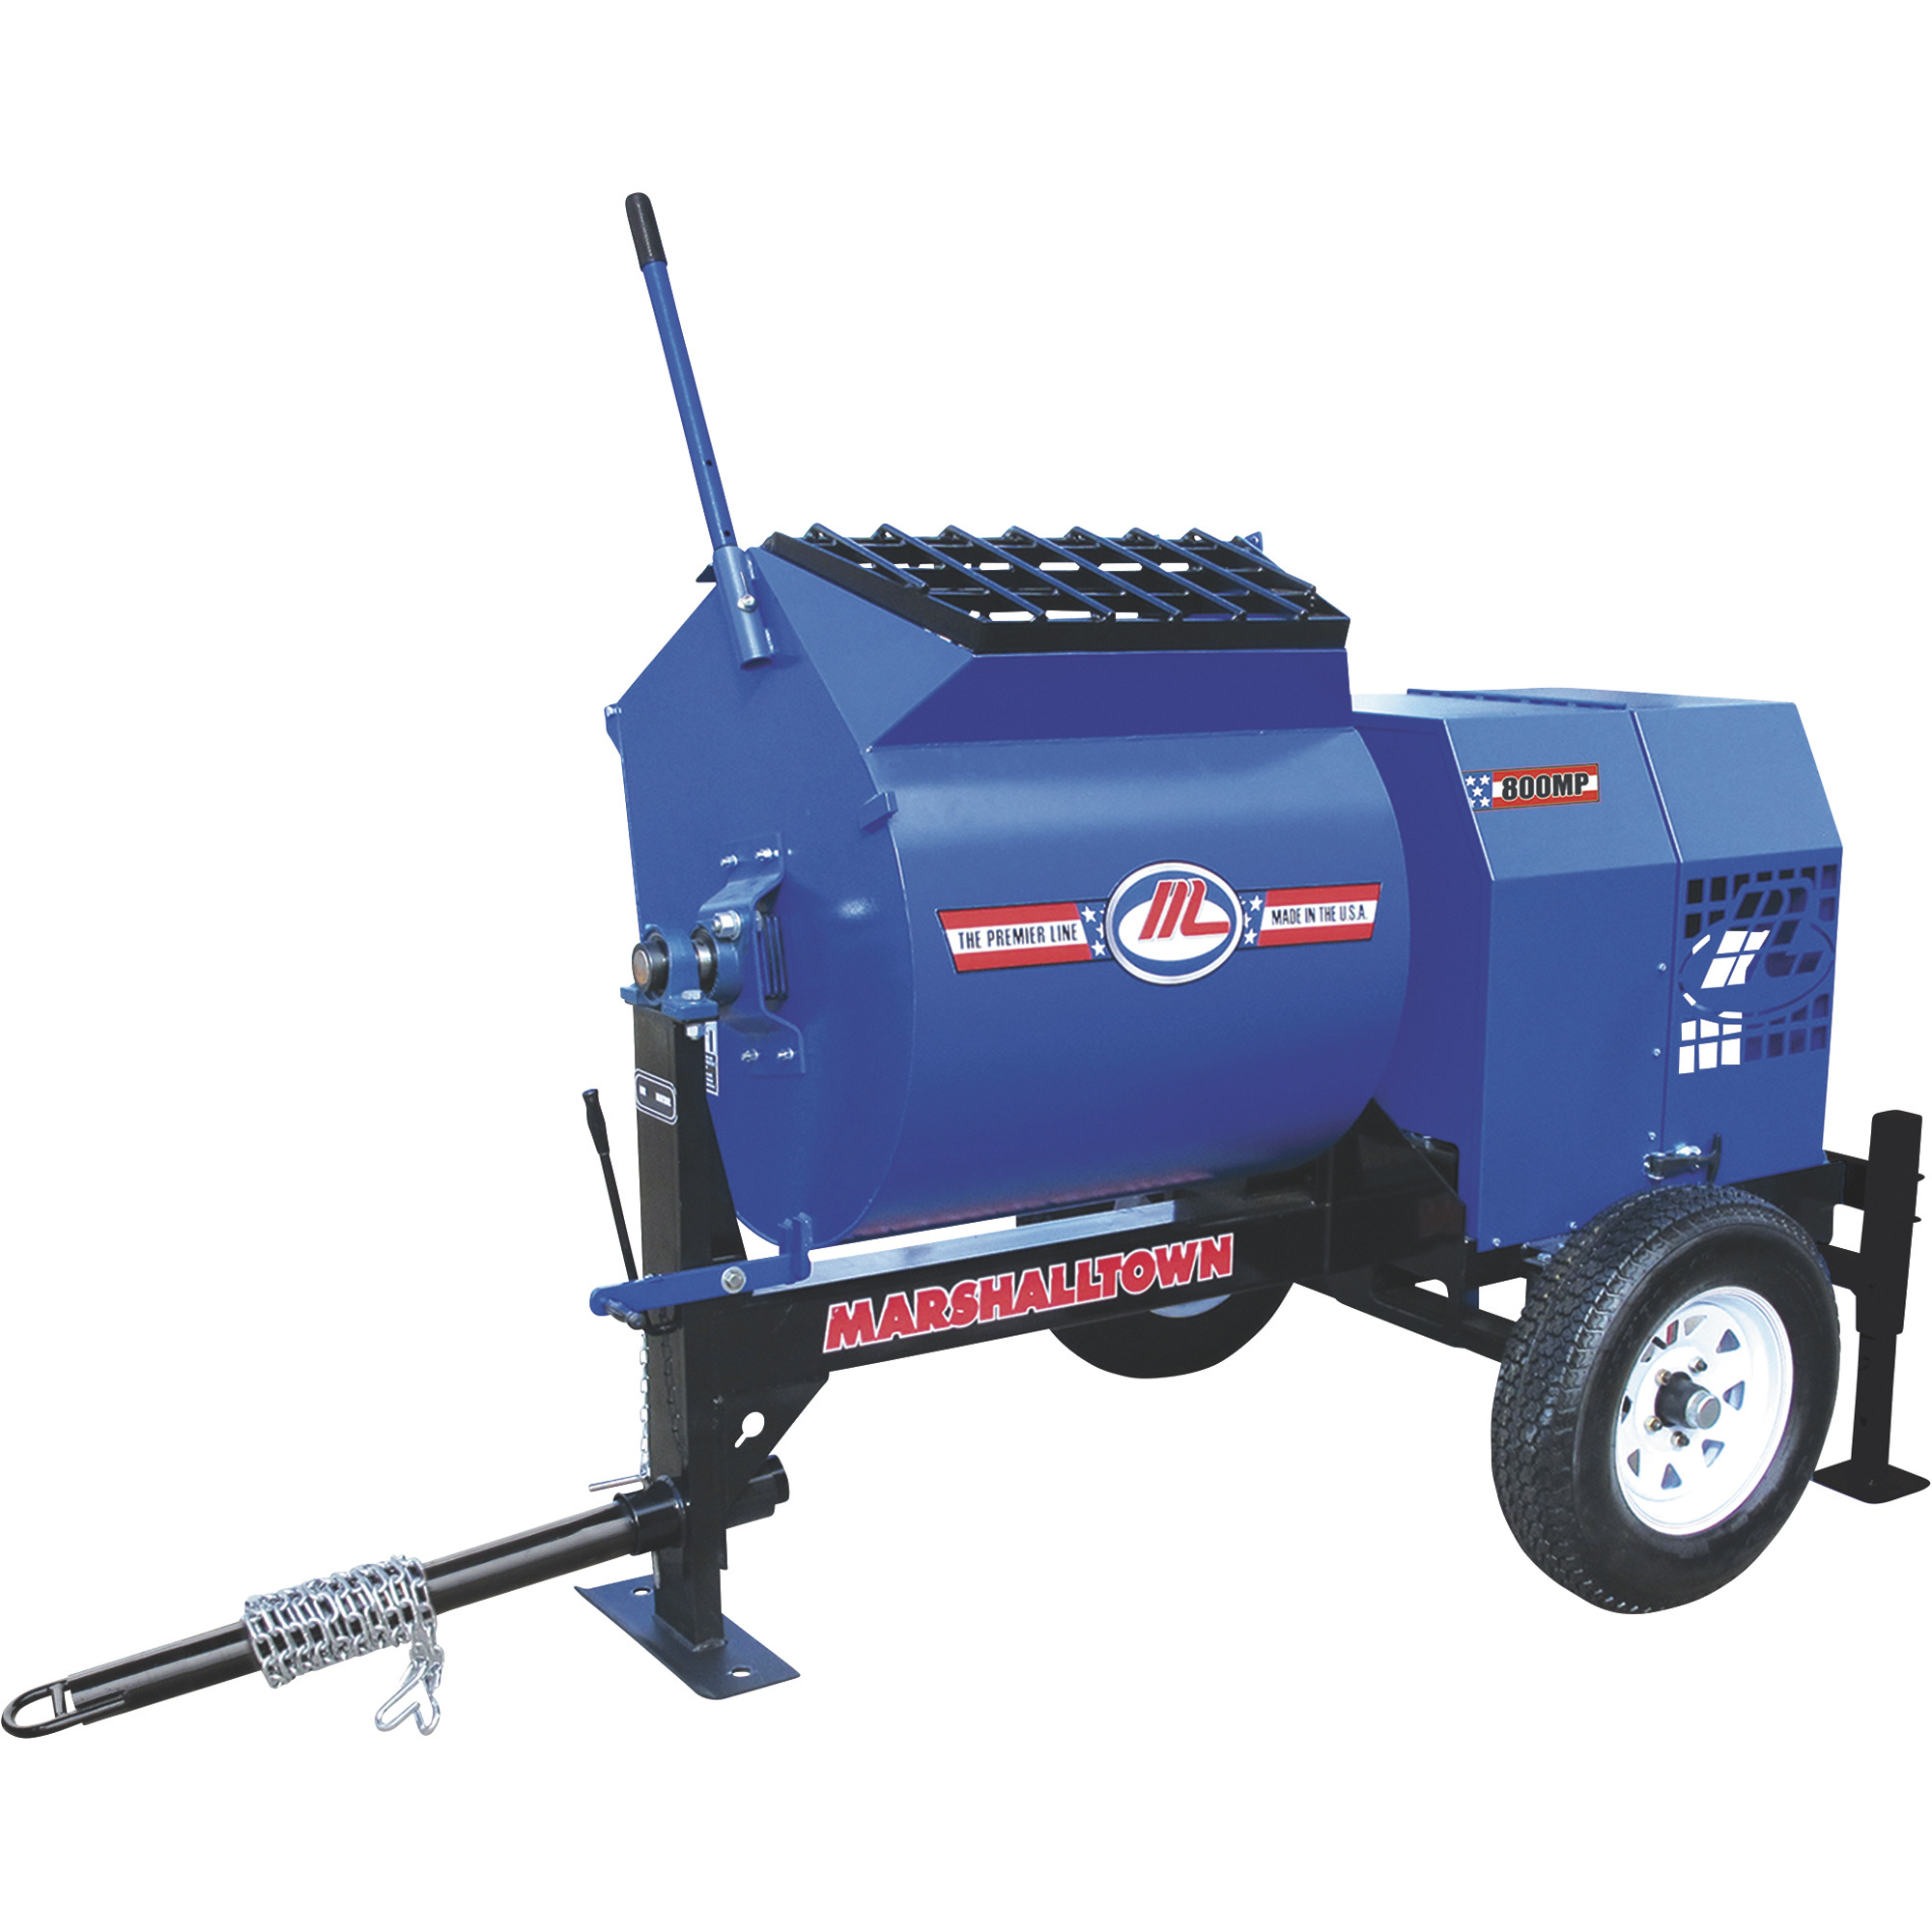 Marshalltown 800MP Mortar/Plaster Mixer with Pintle Tow and Outriggers and 8 HP Gas Engine â Model 800MP8HPO